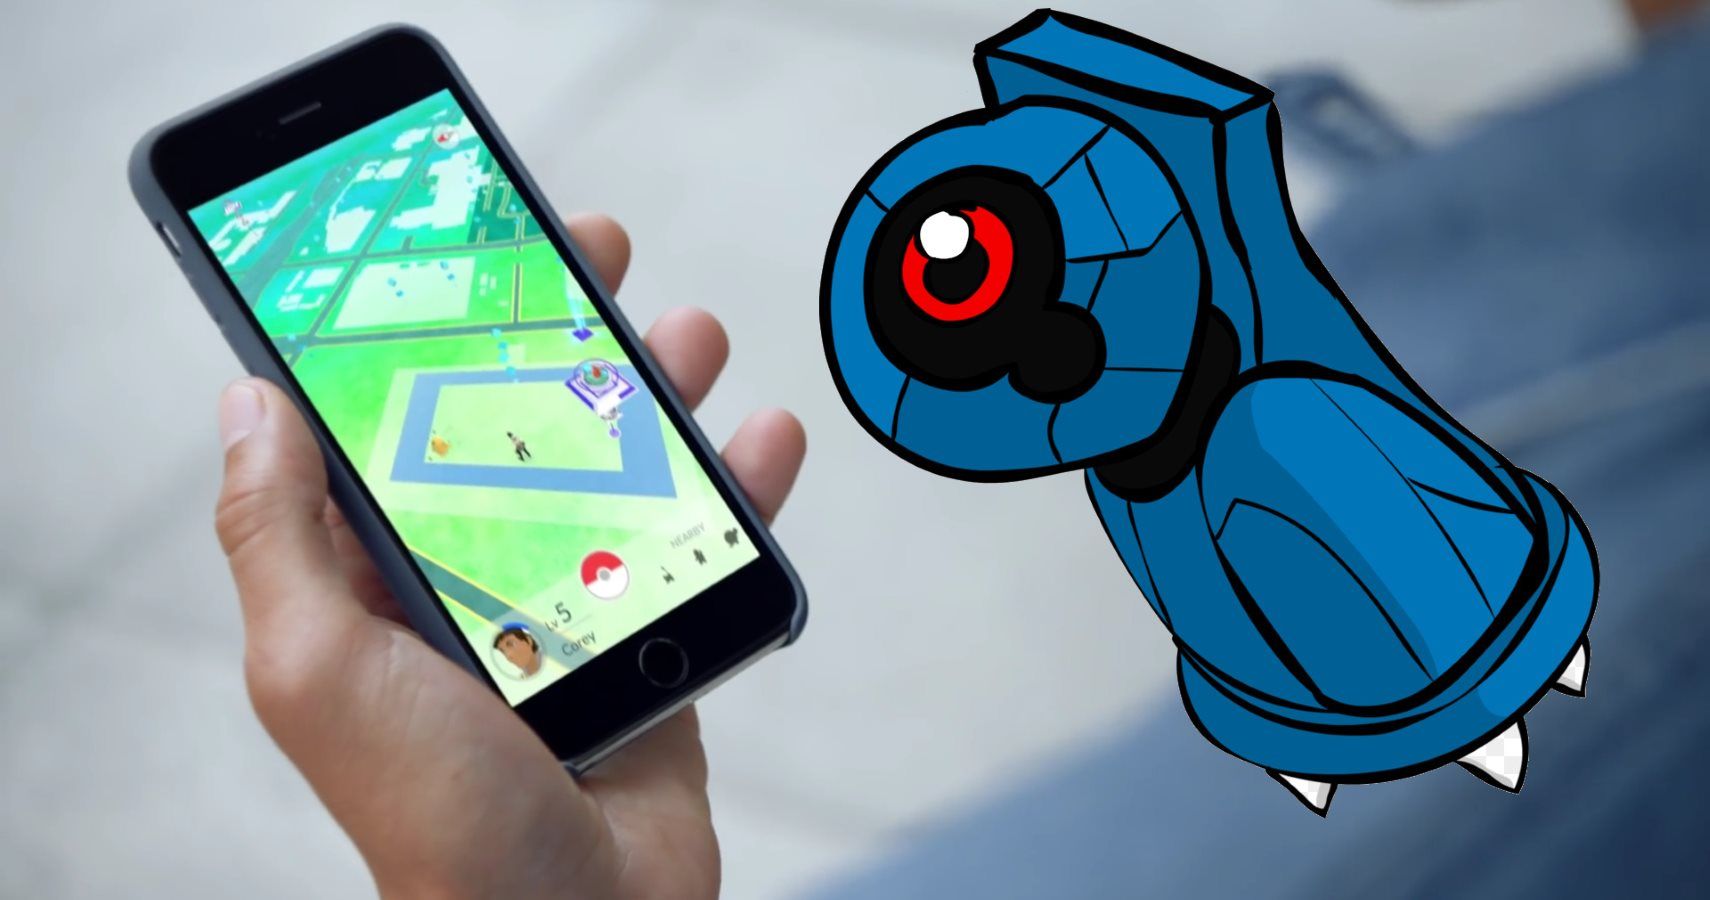 Pokémon GO Leak Suggests Beldum - The First Form Of Metagross - Is Getting Its Own Community Day